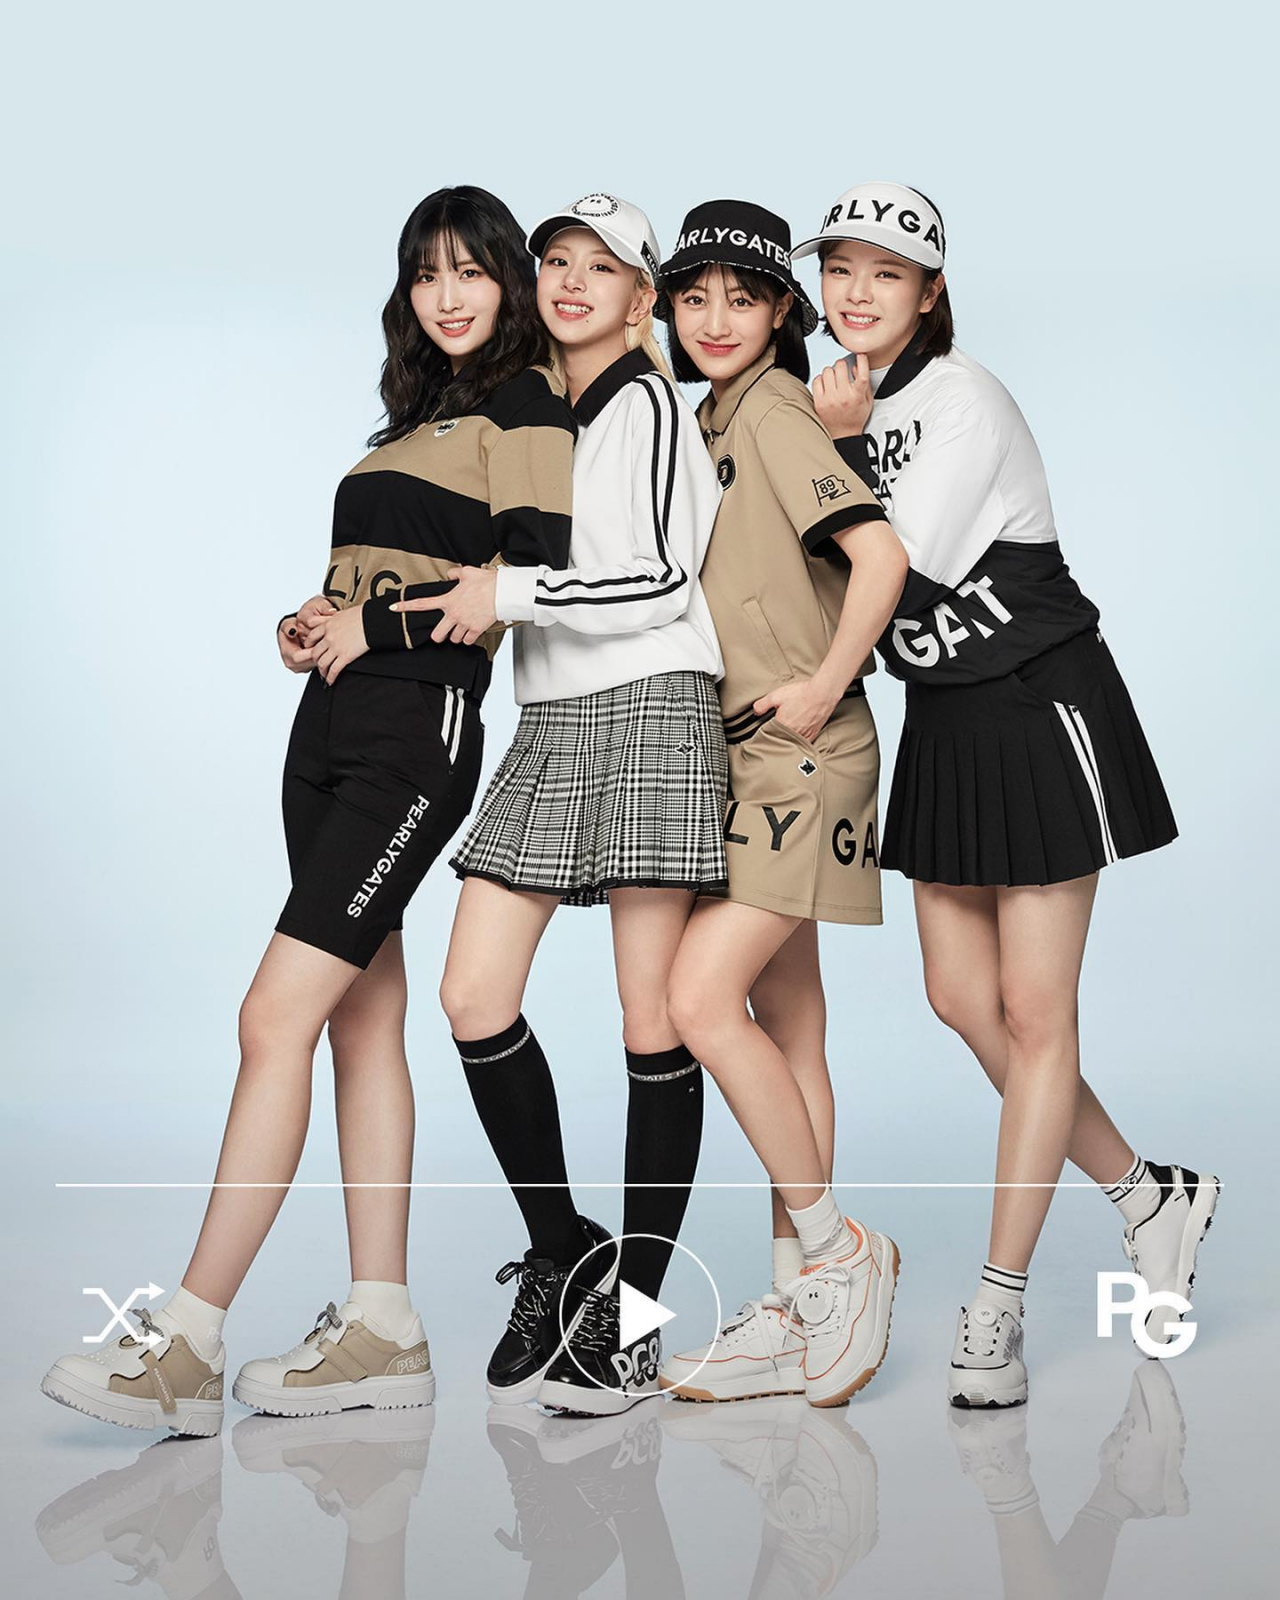 K-pop girl band Twice has recently renewed its contract with golf wear brand Pearly Gates. A growing number of K-pop artists and TV celebrities appear in golf wear advertising campaigns. (Pearly Gates)